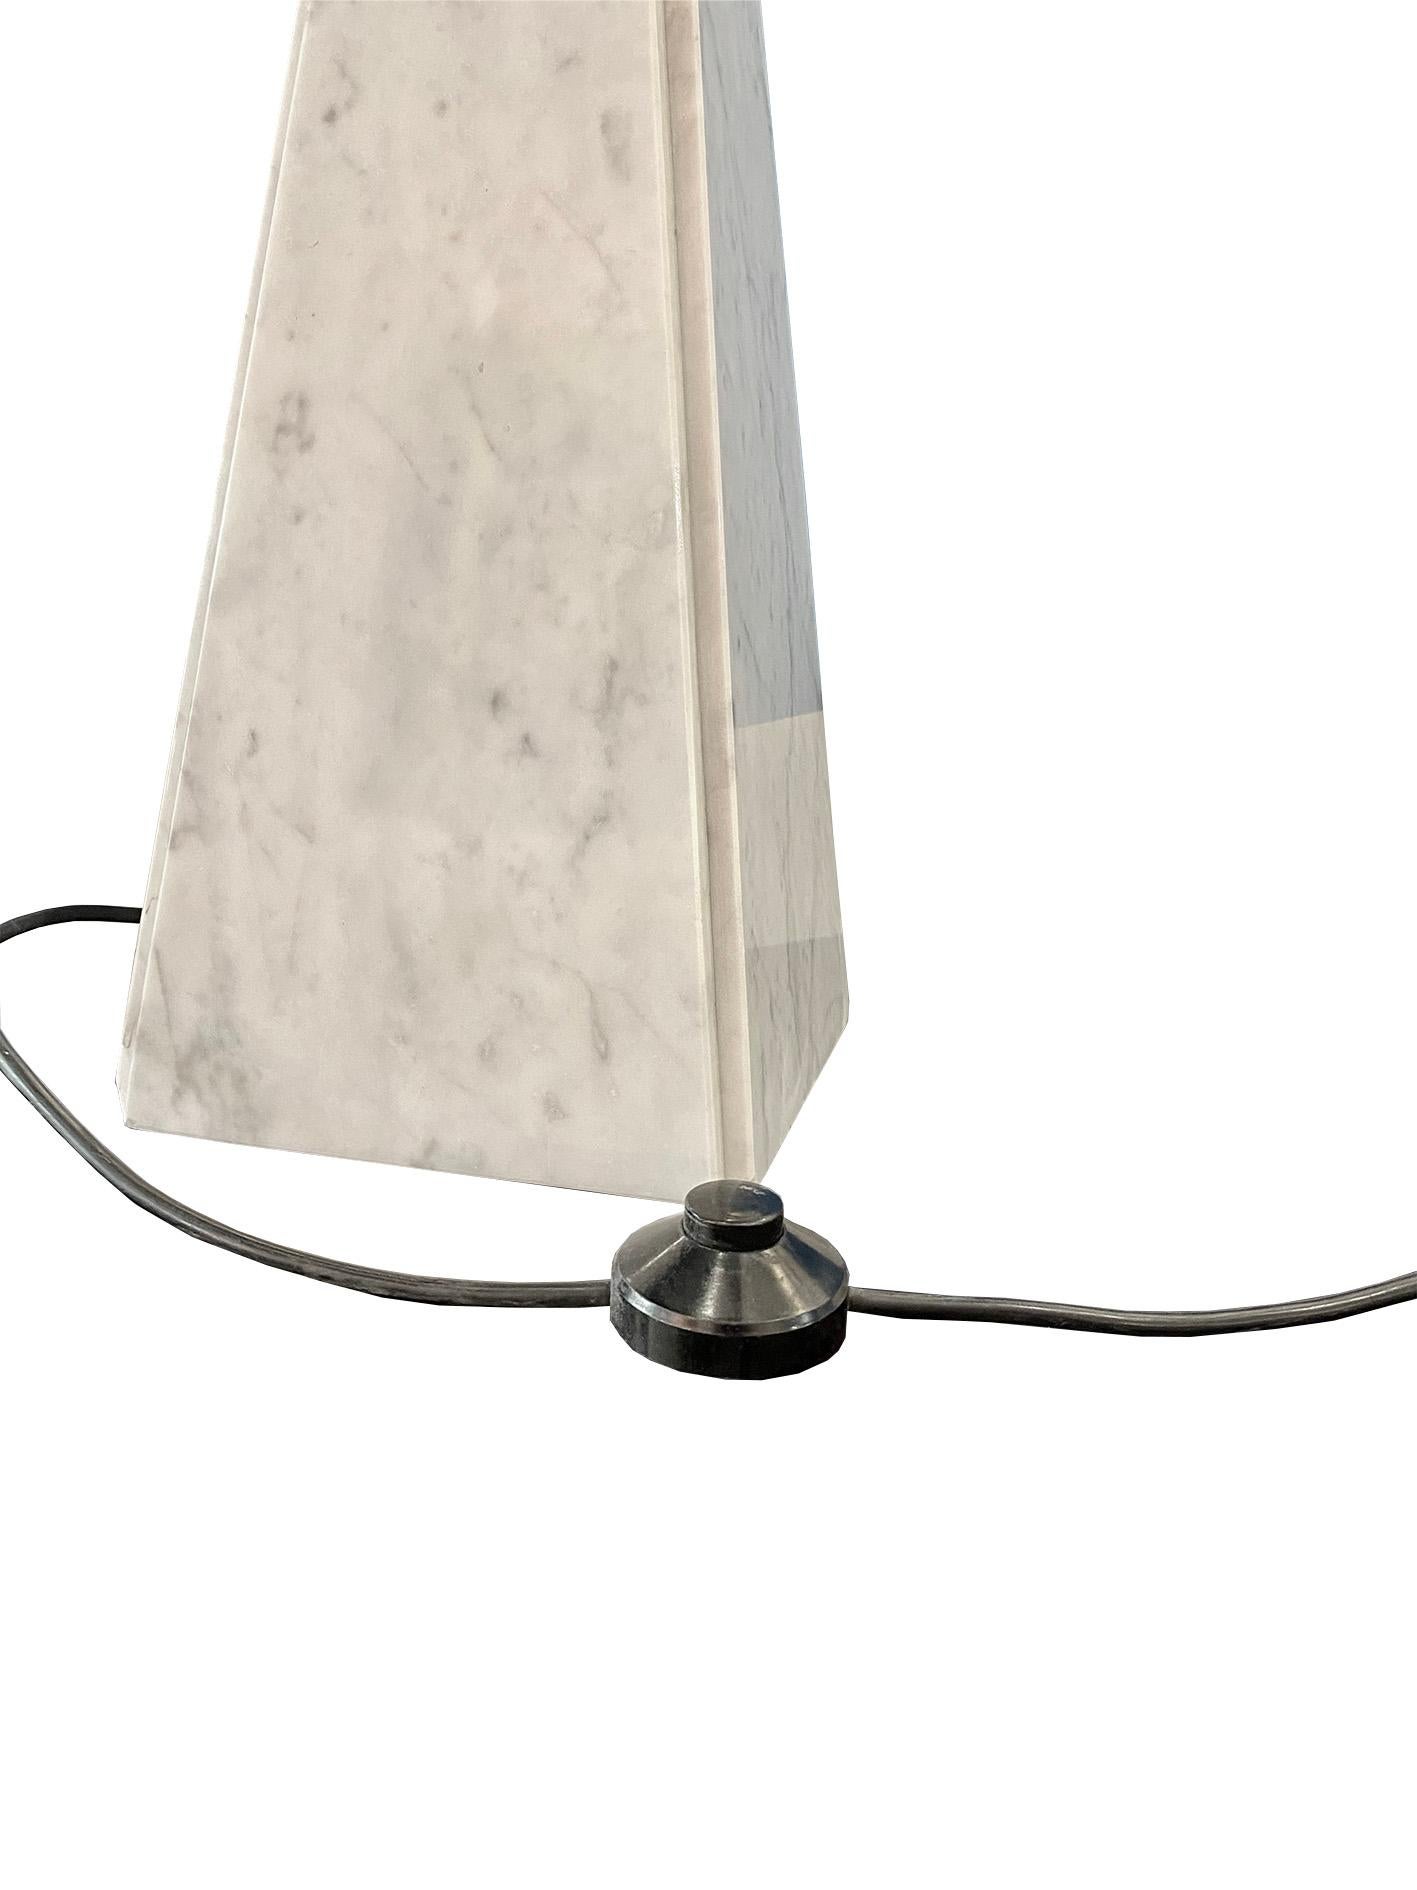 The Cini Boeri white marble and brass 'Abat-Jour' table lamp, a creation for Arteluce, is a true embodiment of refined design, showcasing the fusion of luxurious materials, sculptural aesthetics, and the art of illumination. Crafted by the visionary